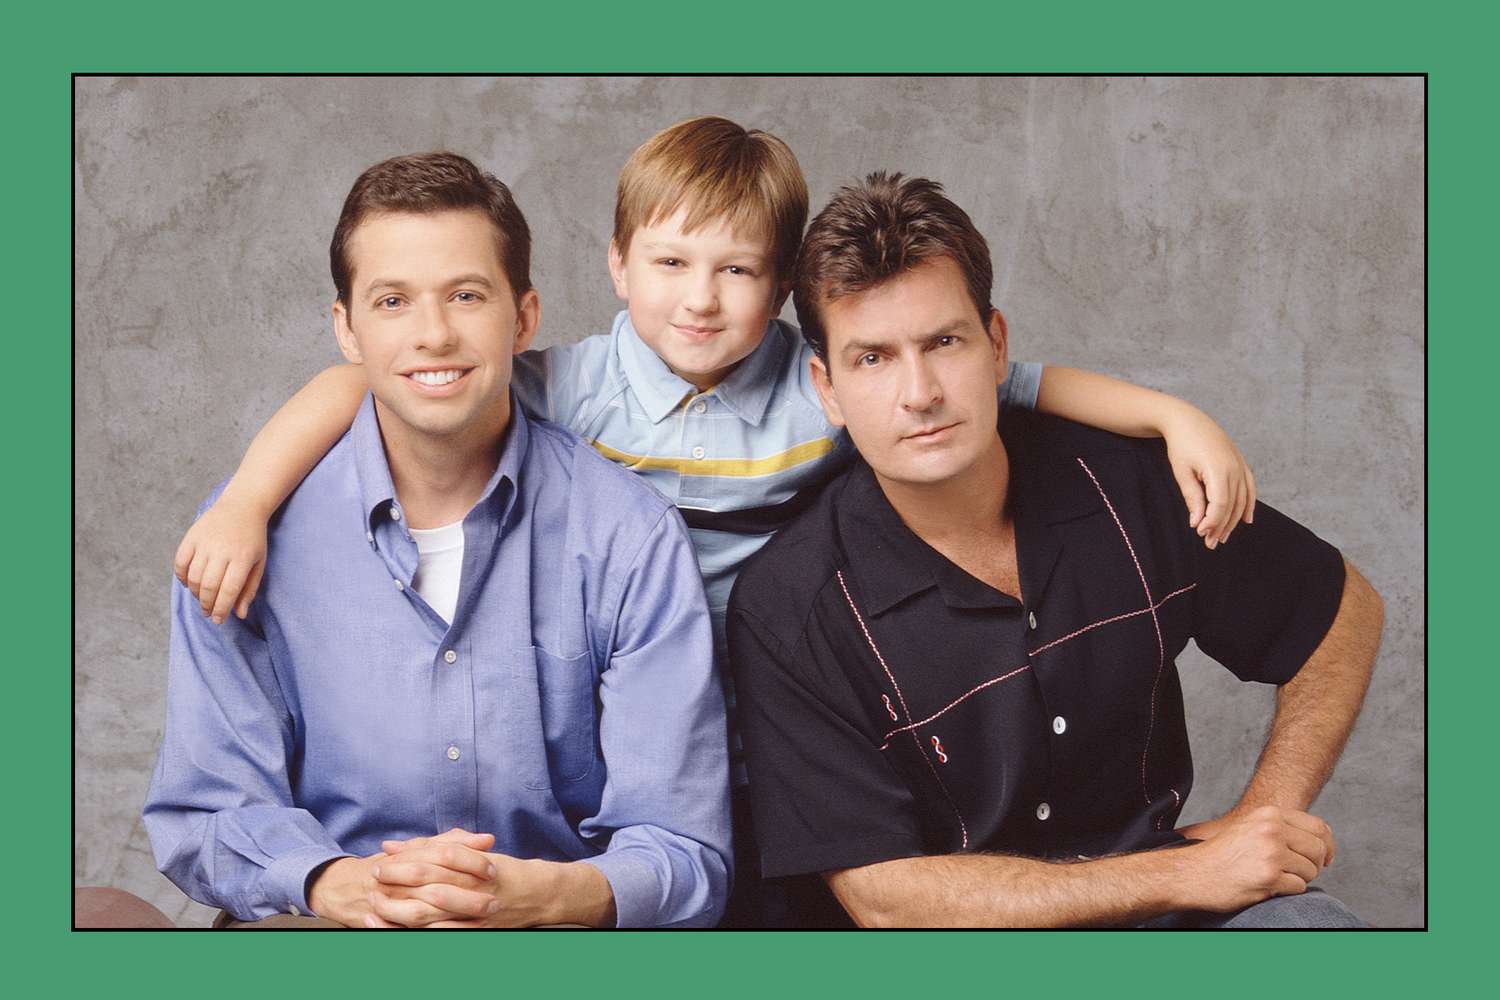 How 'Two and a Half Men' Unexpectedly Saved the Sitcom World